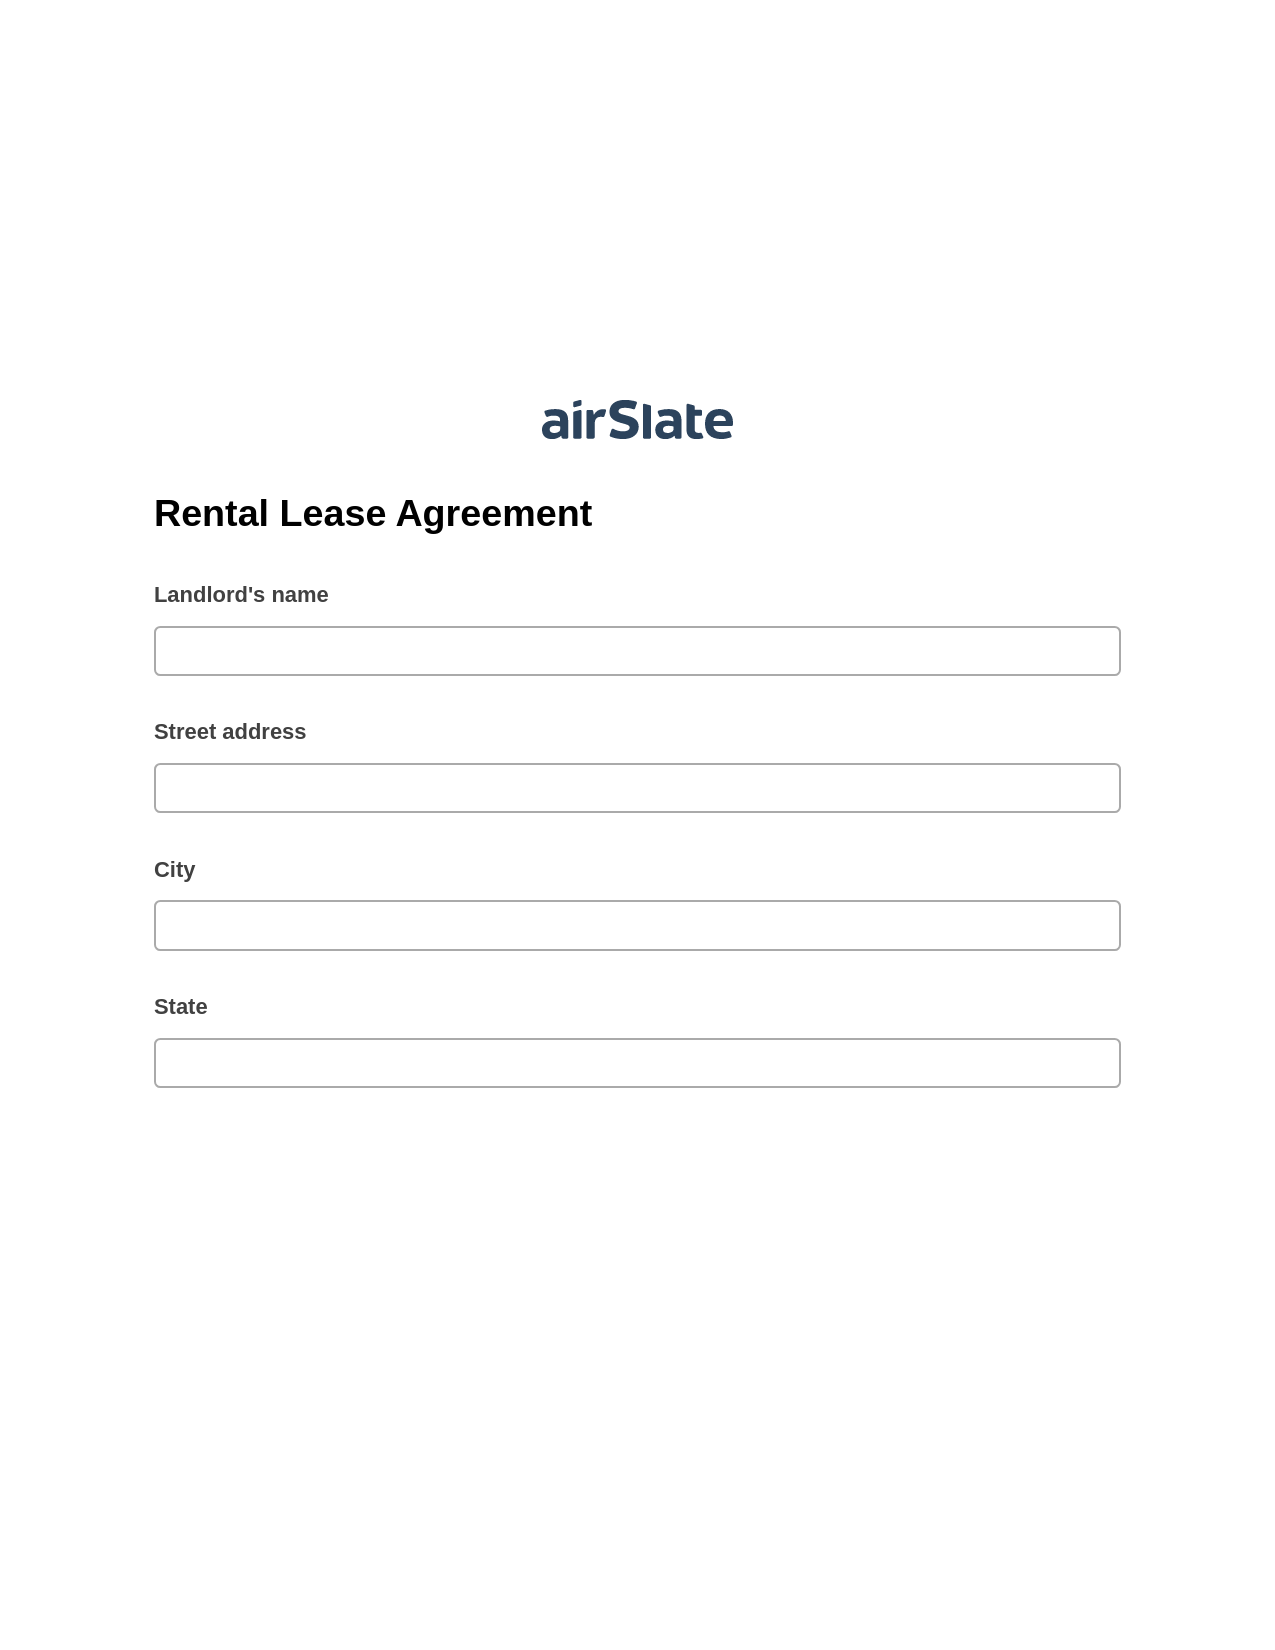 Rental Lease Agreement Pre-fill from CSV File Dropdown Options Bot, Mailchimp send Campaign bot, Export to Google Sheet Bot